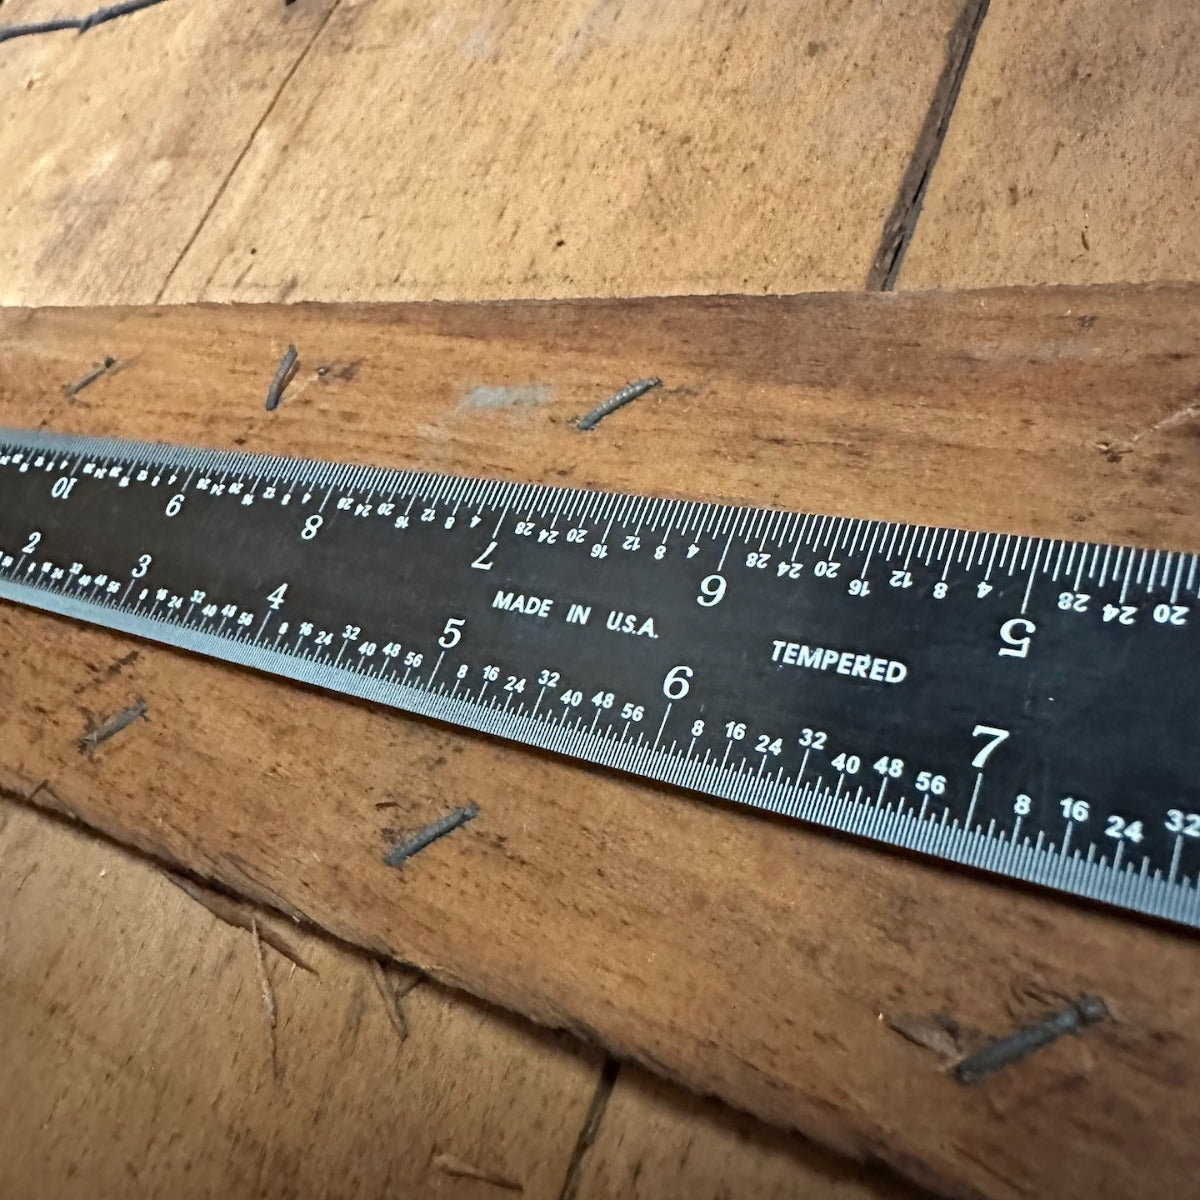 12" Products Engineering 4R Rigid Black EZ Read Tempered Ruler 8ths/16ths 32nds/64th cosmetic blemish, name removed (780026)